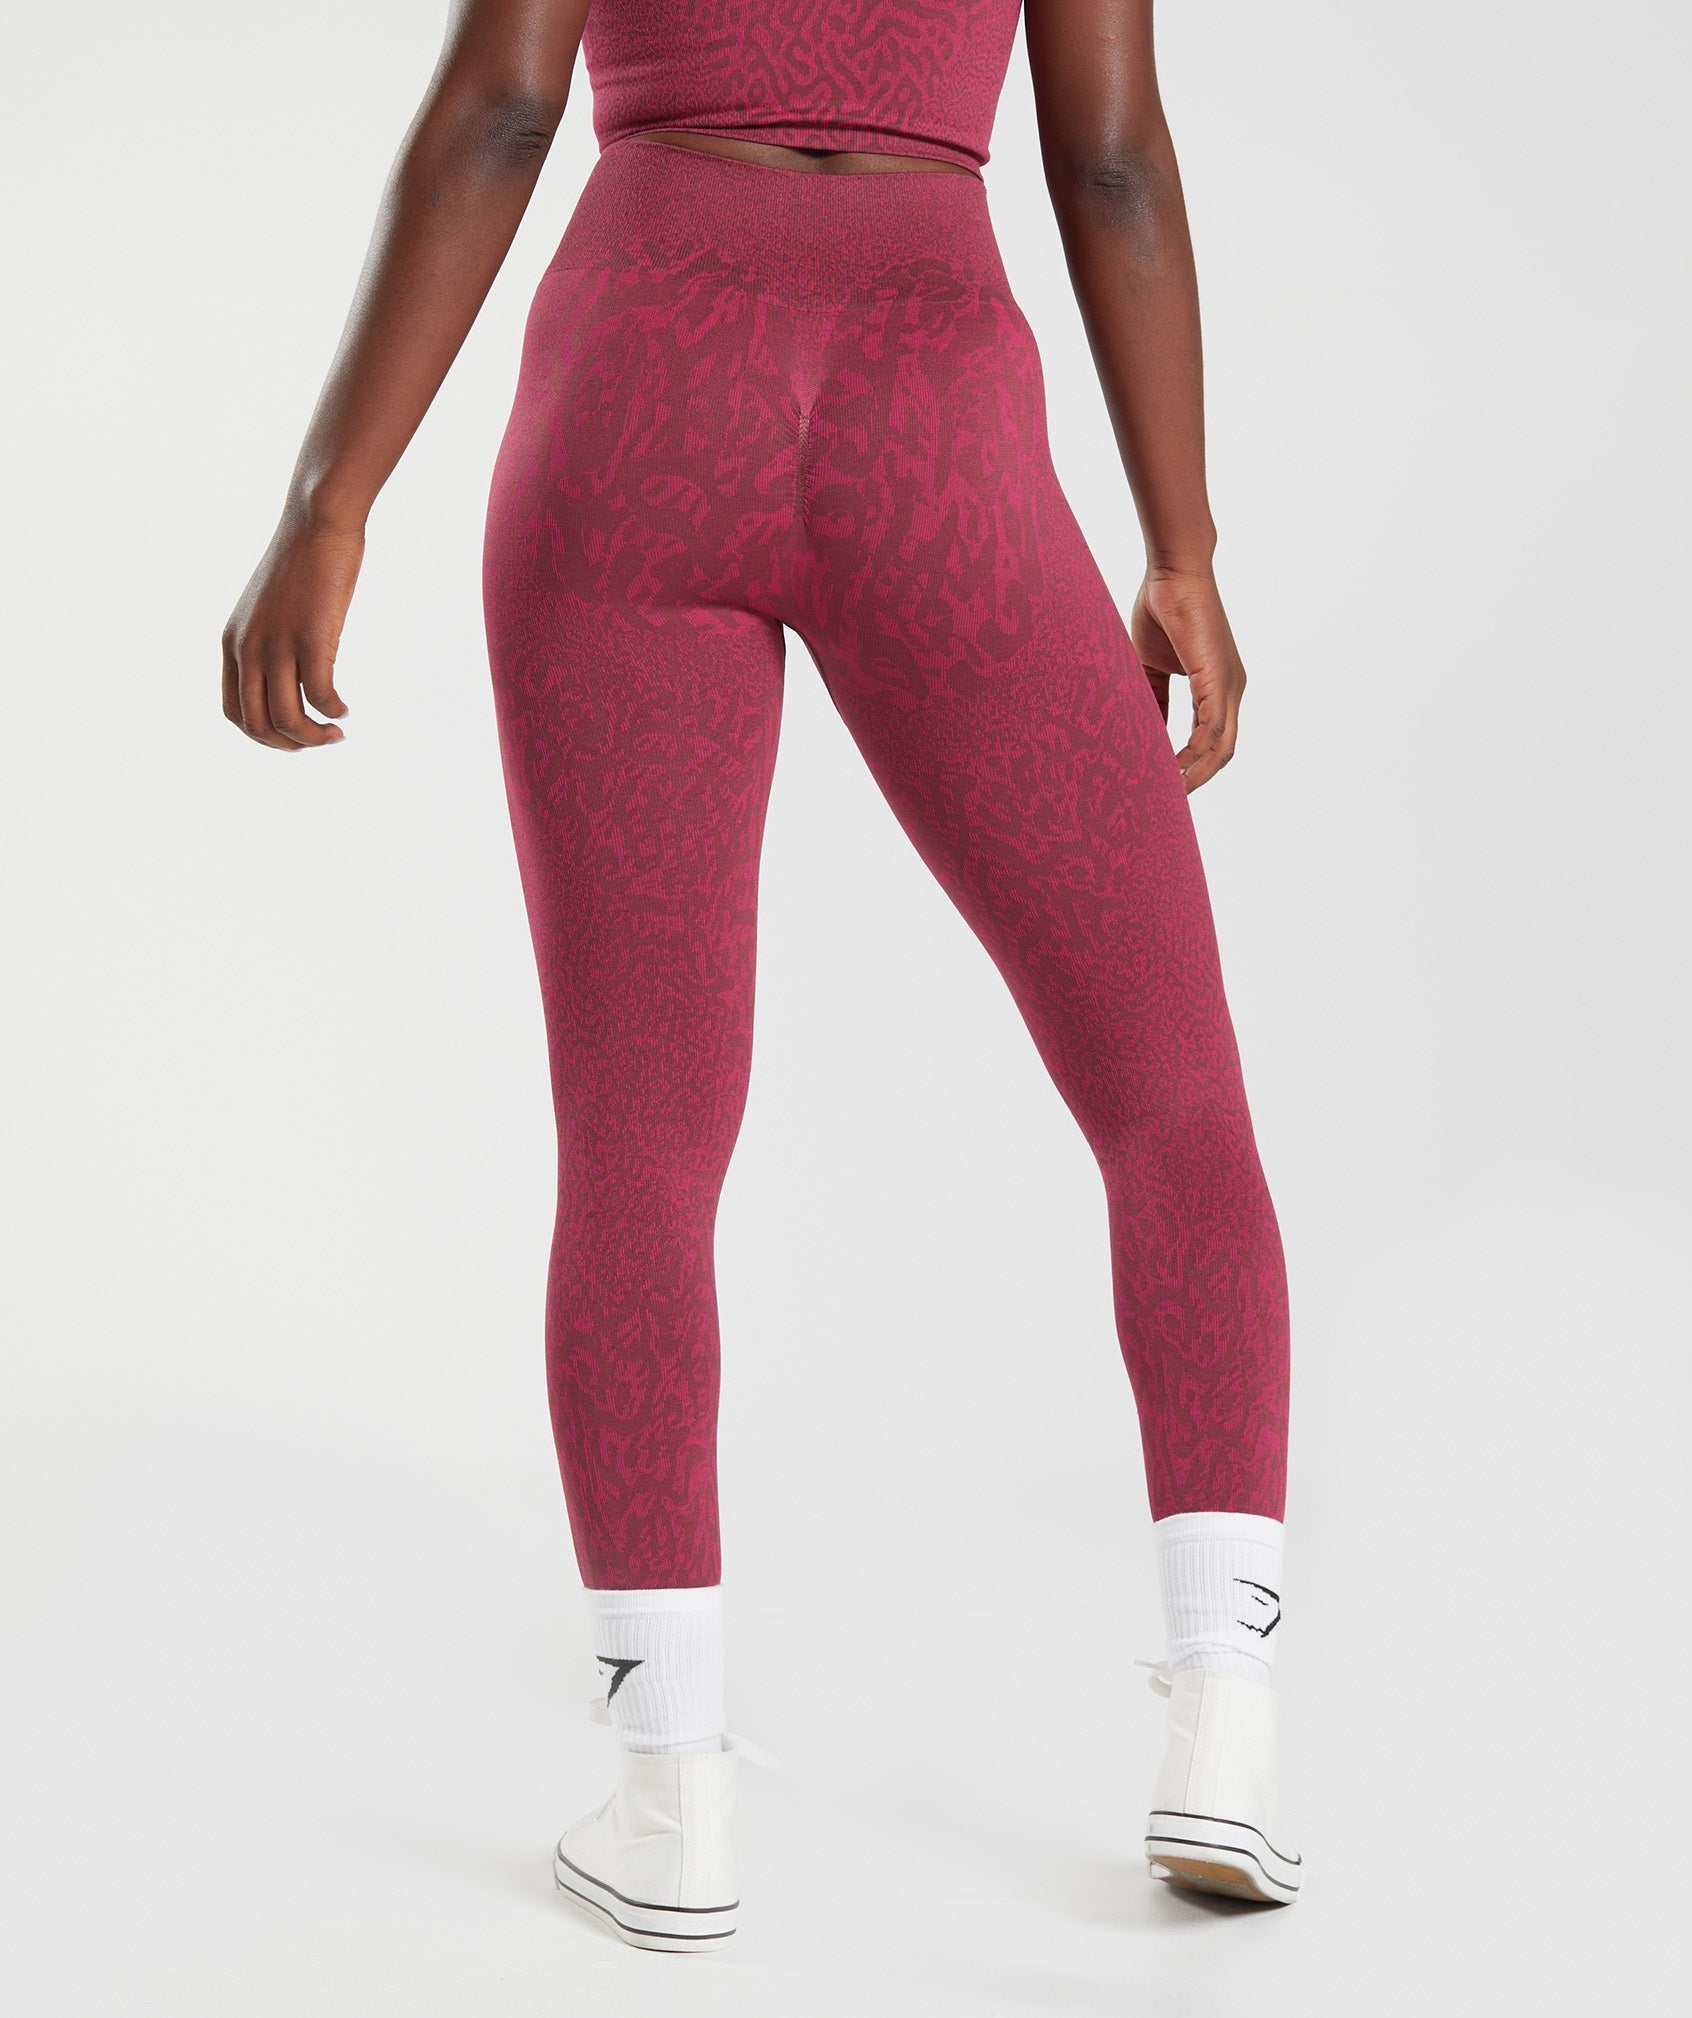 Gymshark Adapt Camo Seamless Leggings Berry Red Size S Small Womens